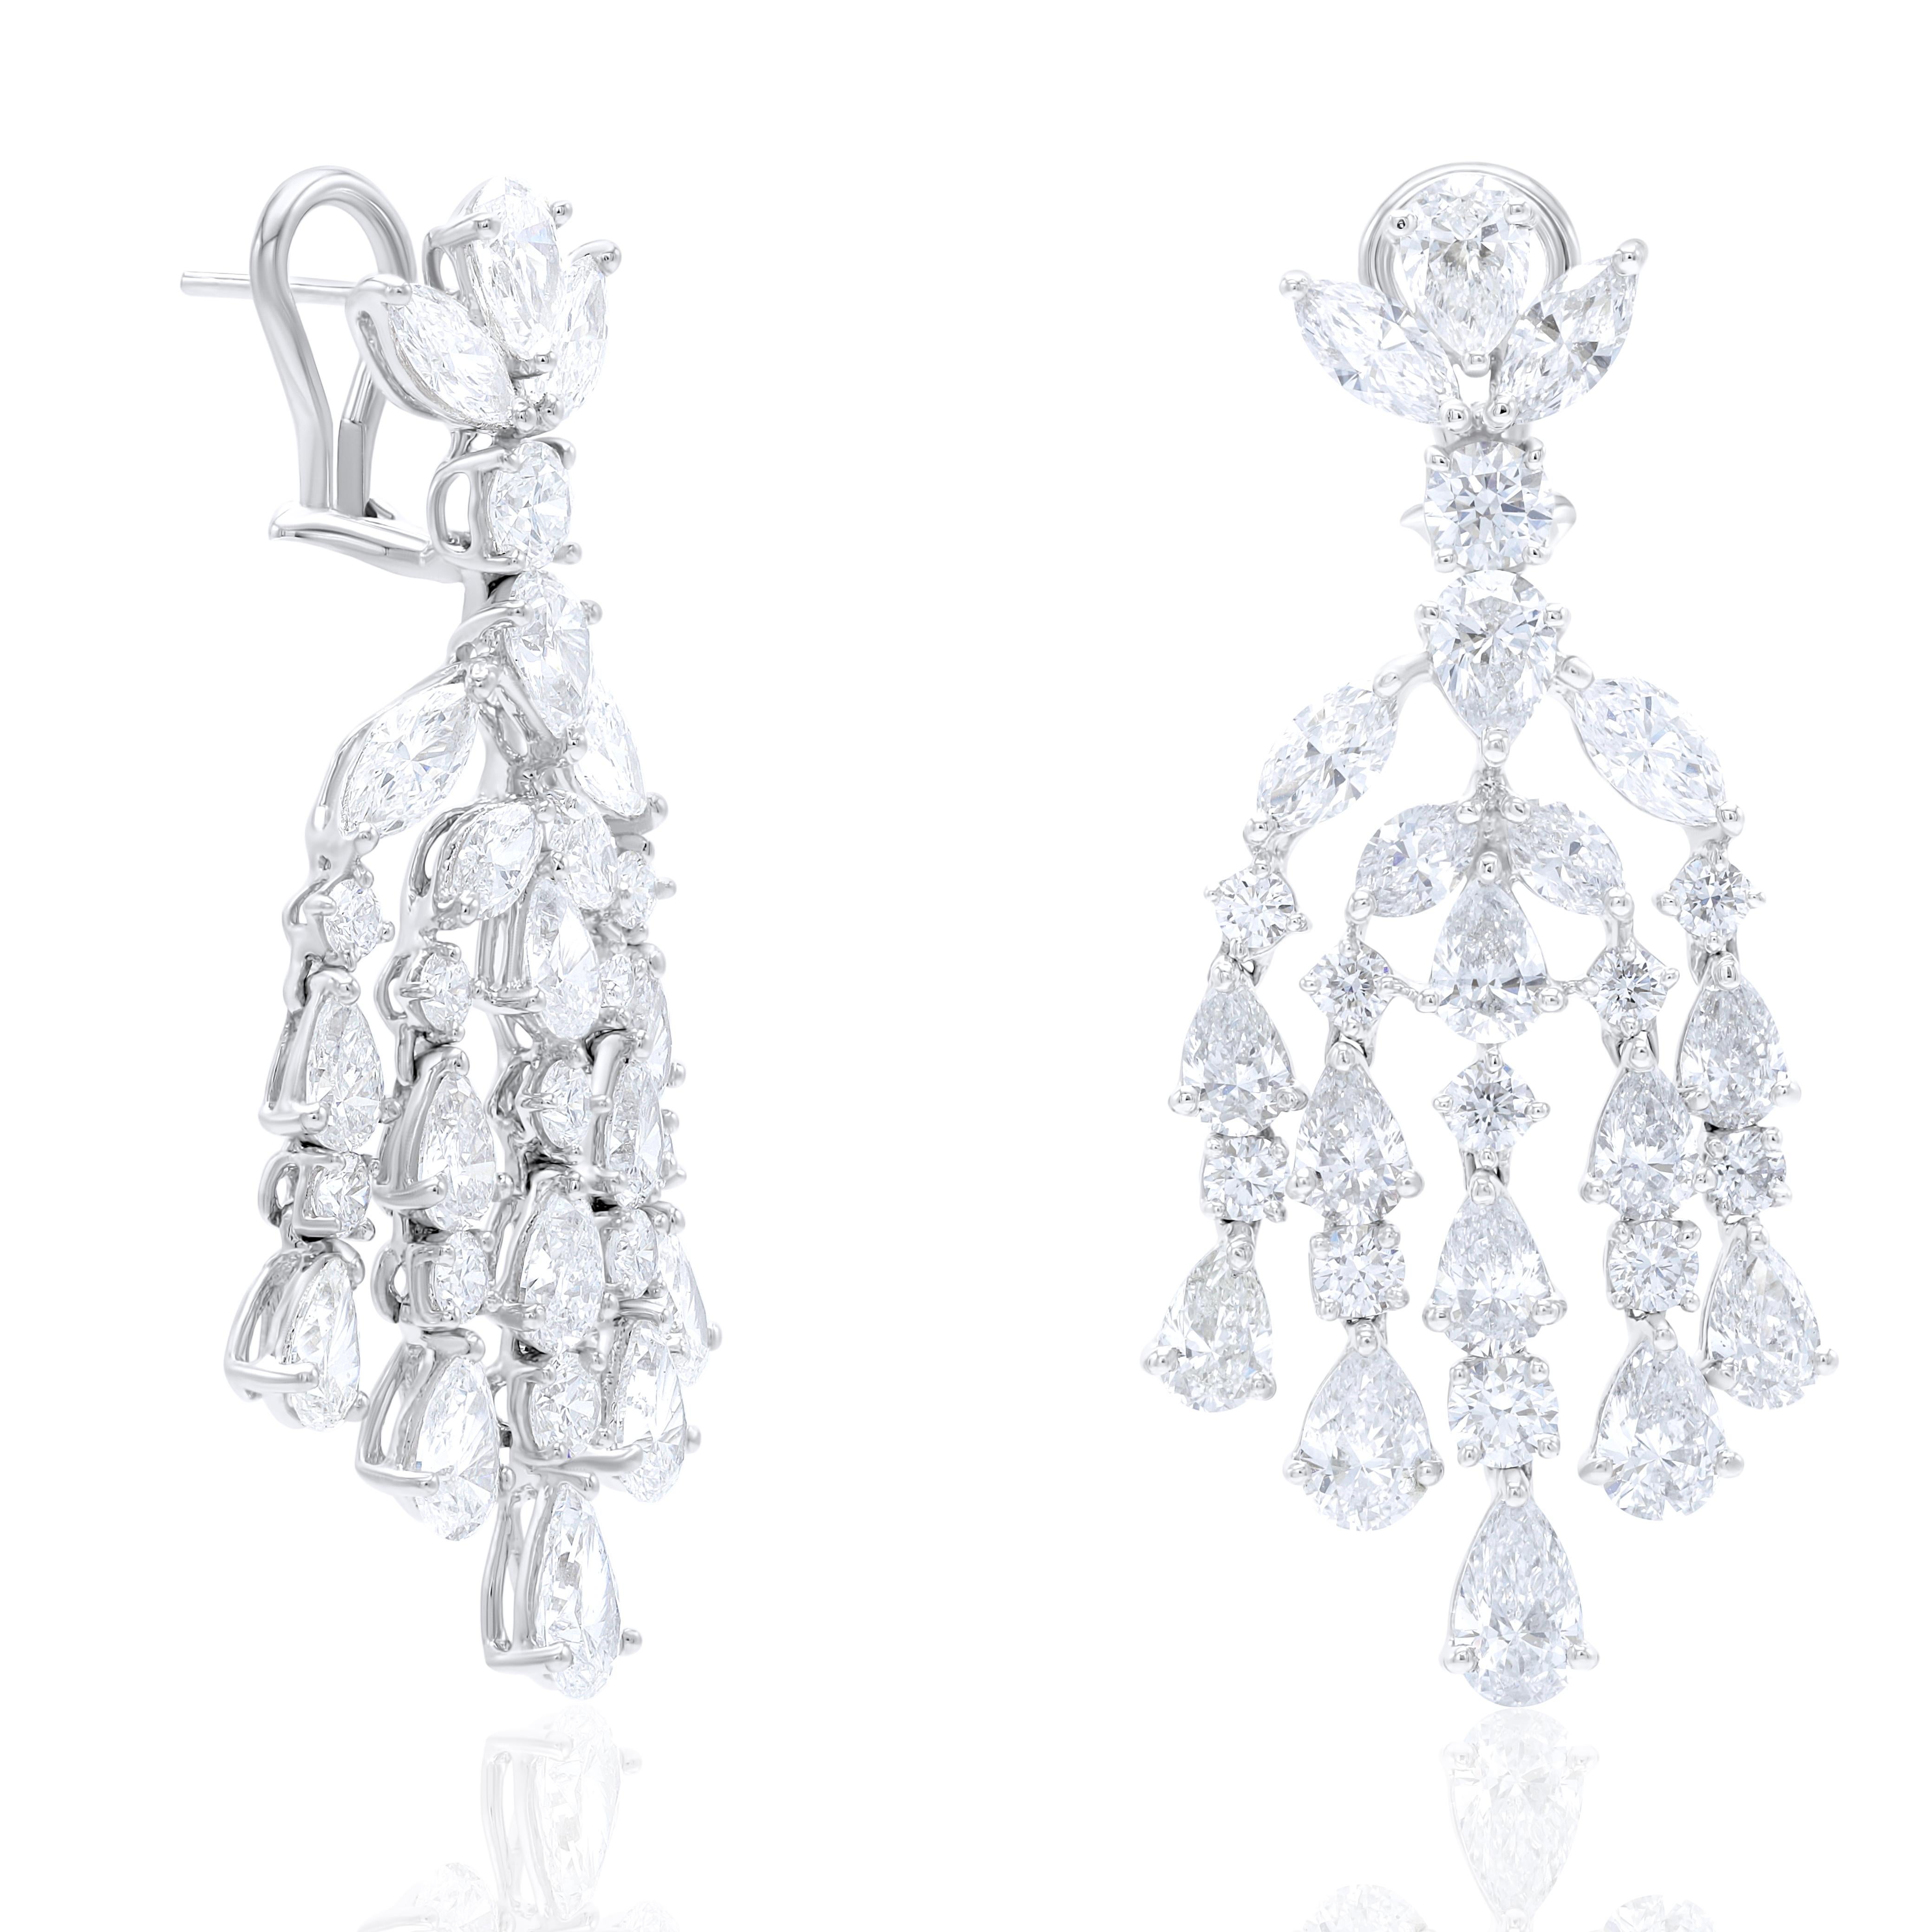 Platinum fashion earrings adorned with 16.55 cts tw of multi shape cluster diamonds in a chandelier design.
Diana M. is a leading supplier of top-quality fine jewelry for over 35 years.
Diana M is one-stop shop for all your jewelry shopping,